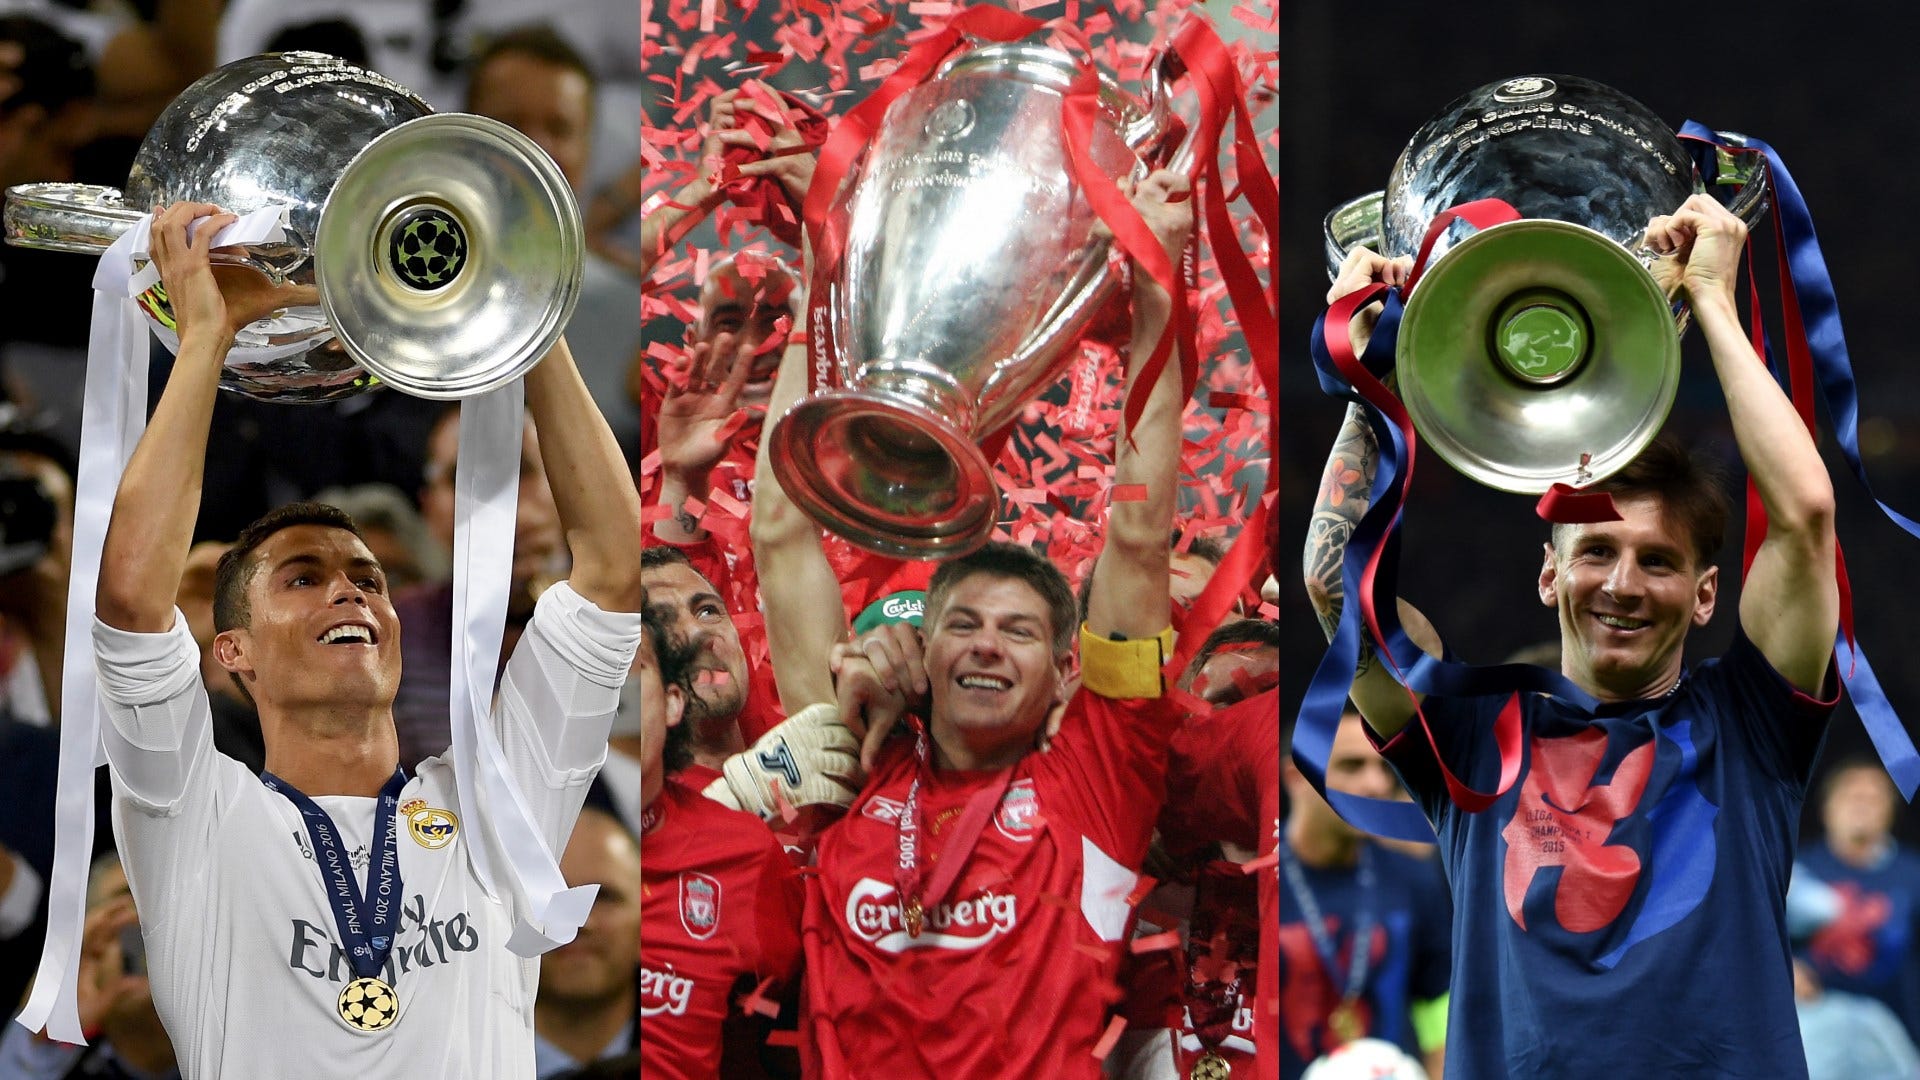 RANKED! The 25 best Champions League games of all time